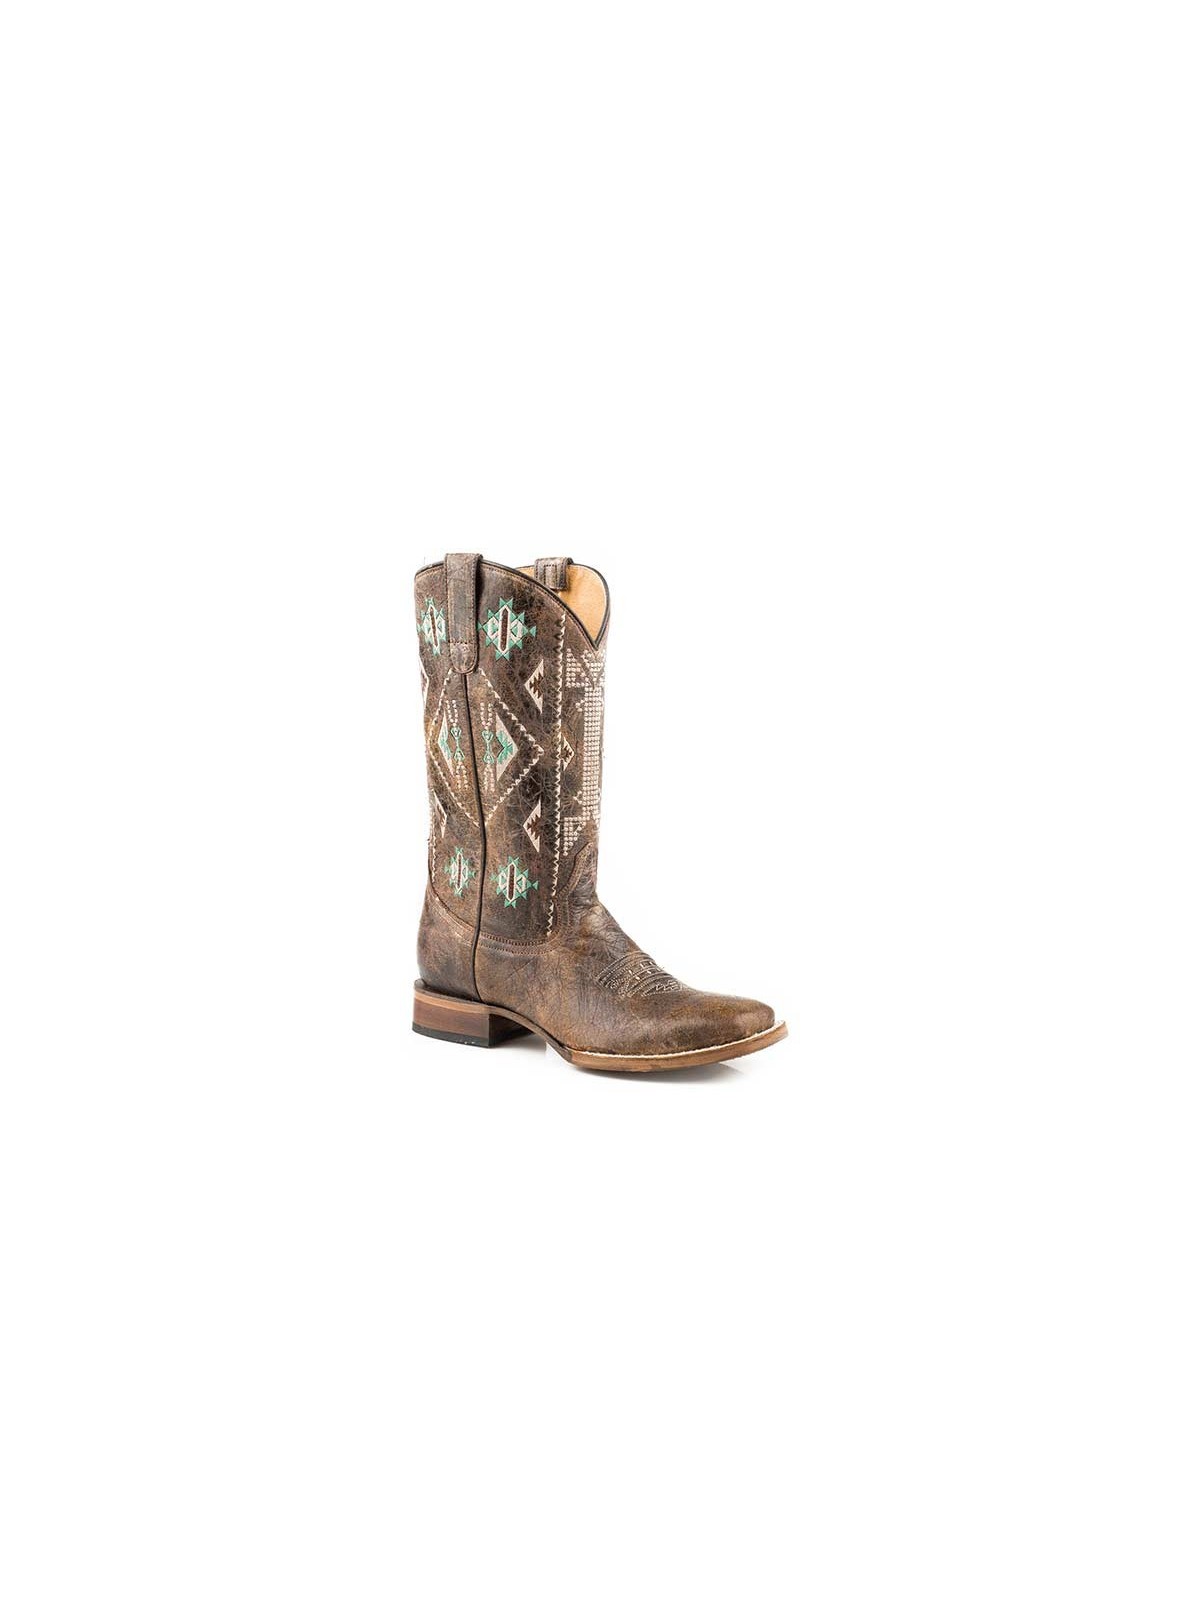 Out West Boot